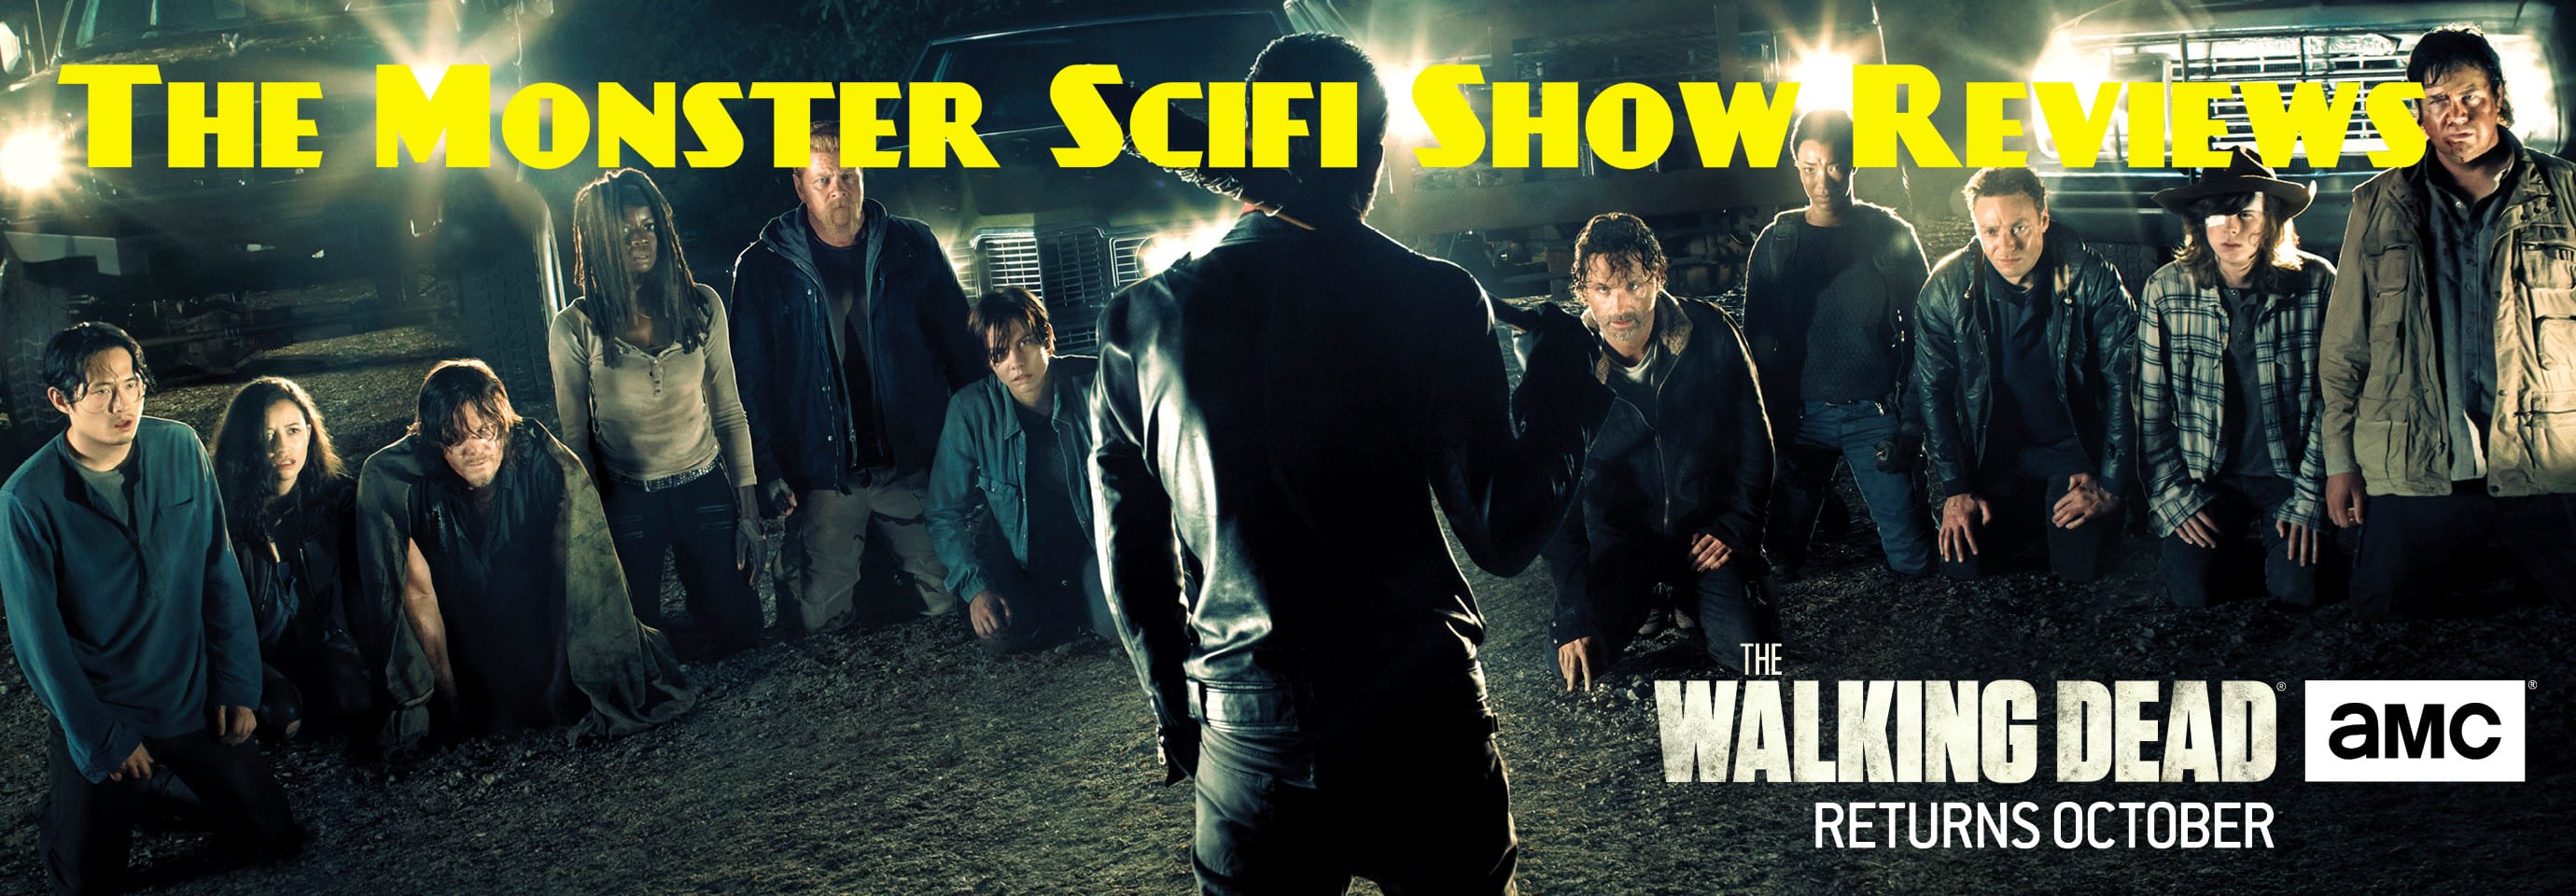 monster-scifi-show-cover-the-walking-dead